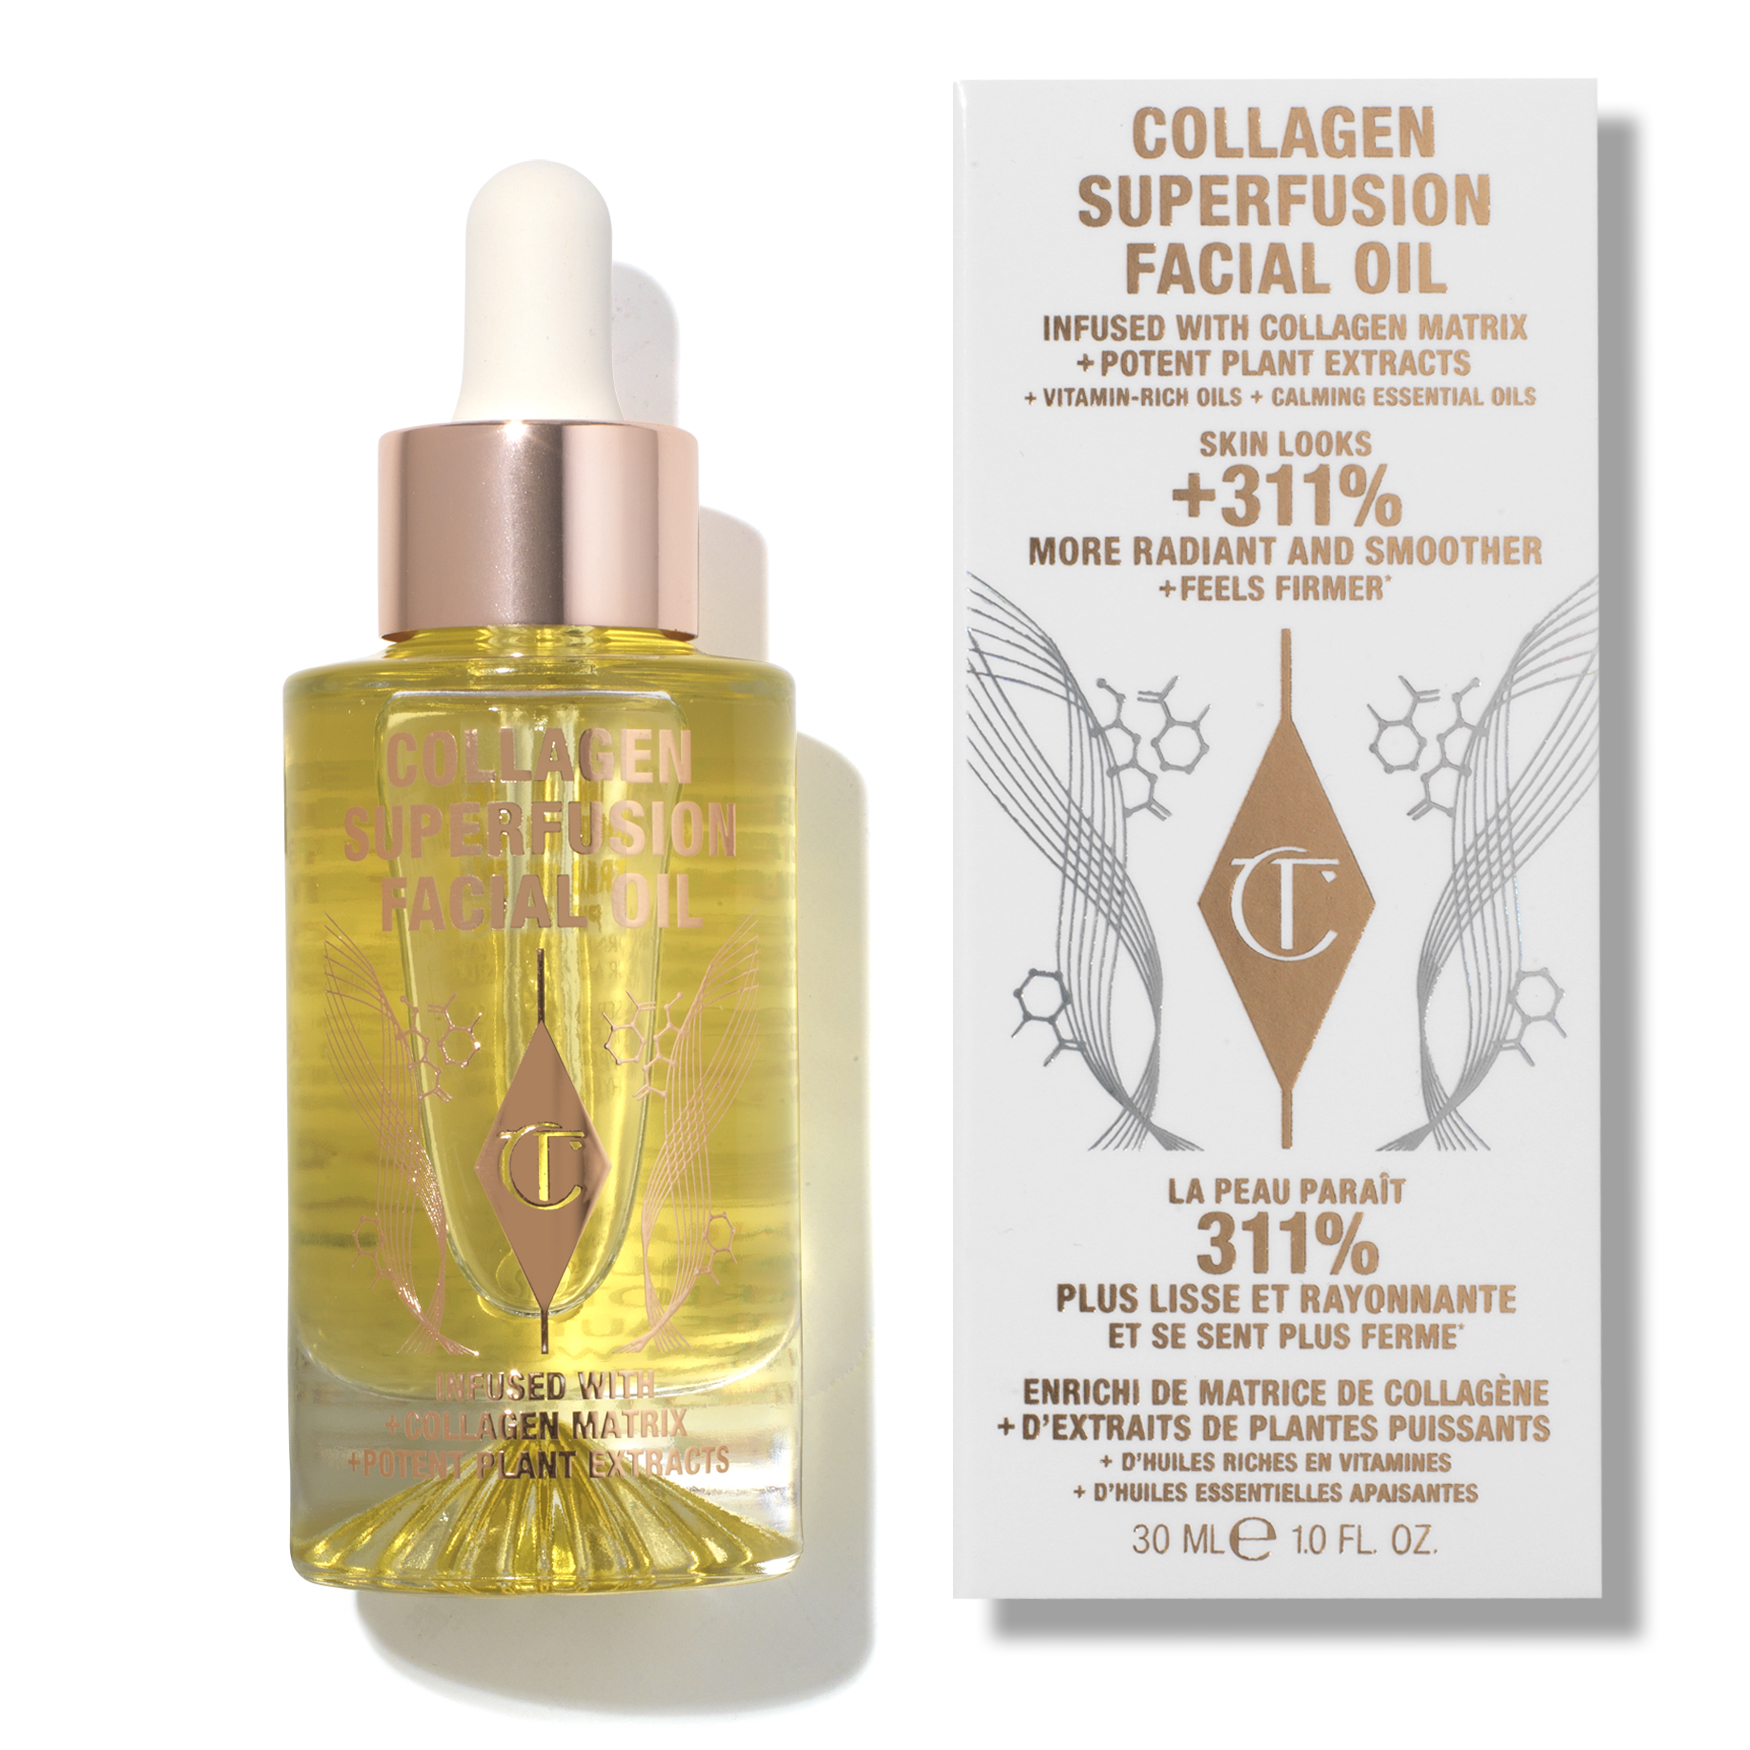 Charlotte Tilbury Collagen Superfusion Facial Oil | Space NK